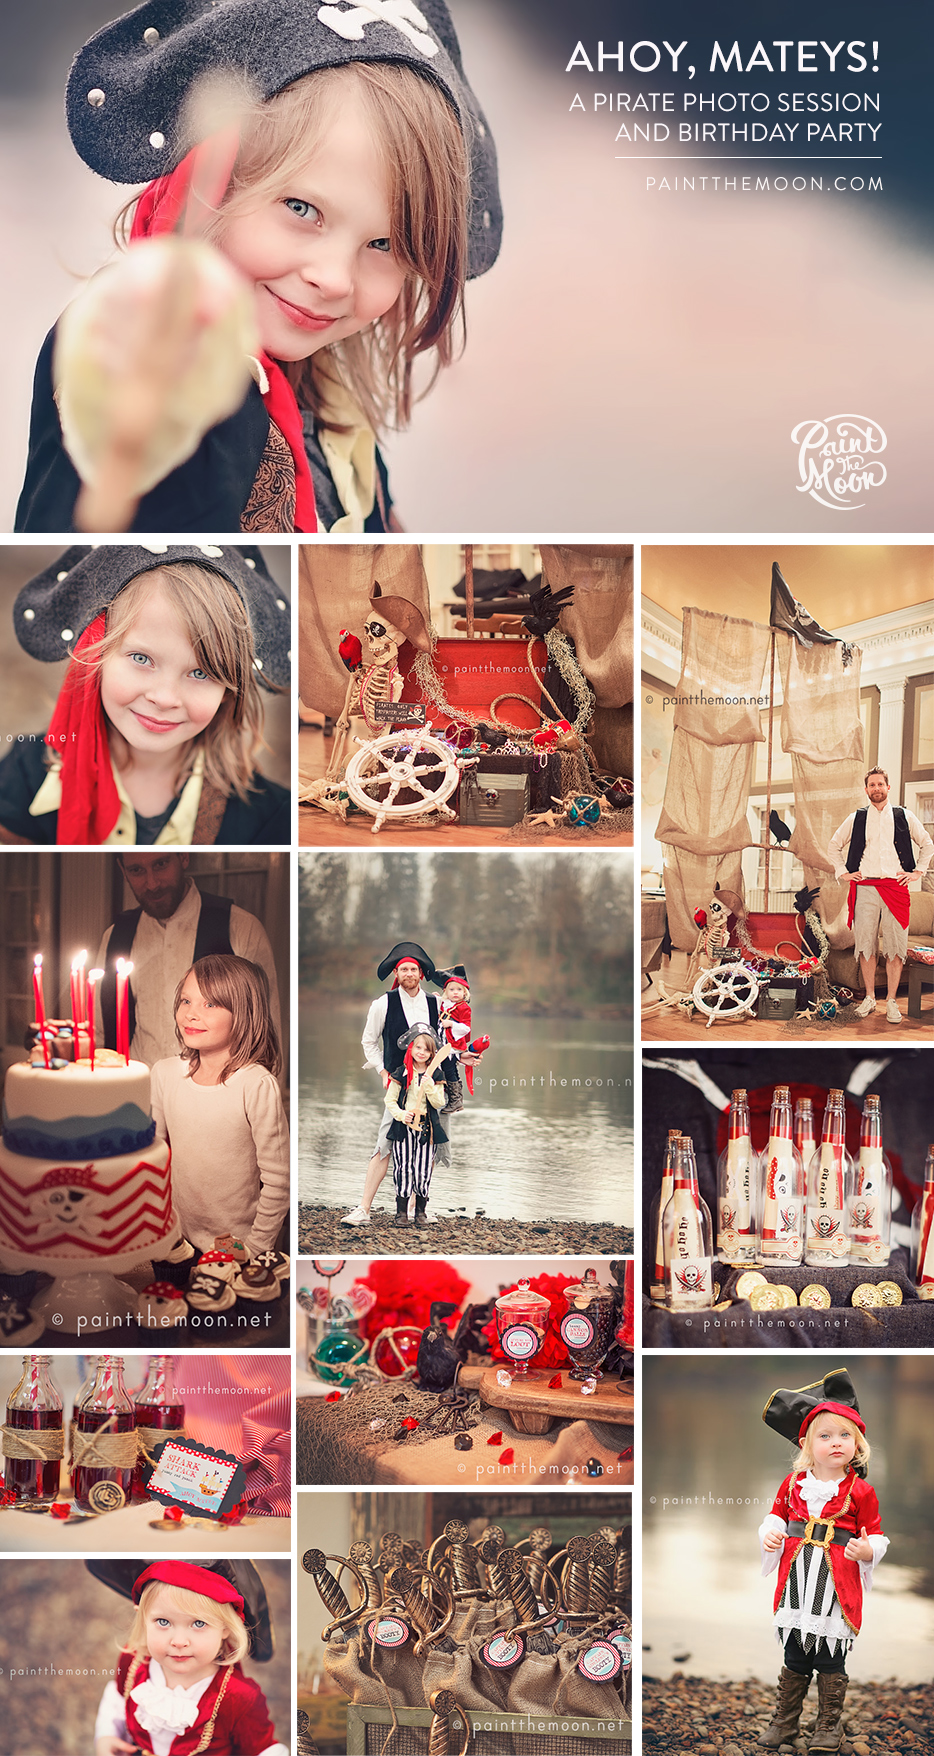 Pirate Themed Photo Session and Birthday Party Ideas